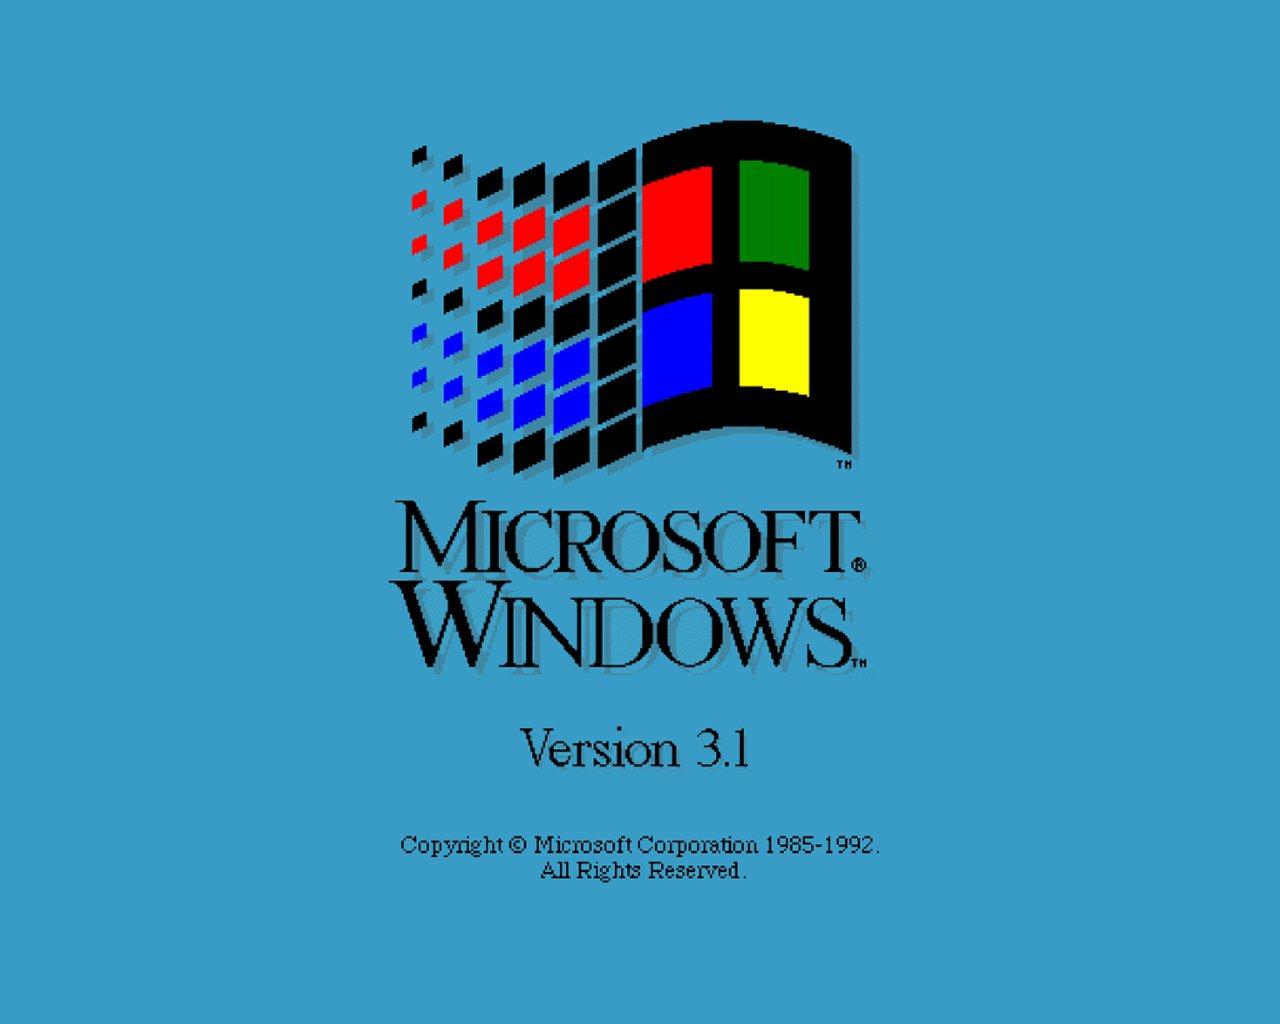 Windows 3.1 Wallpaper and Background Imagex1024